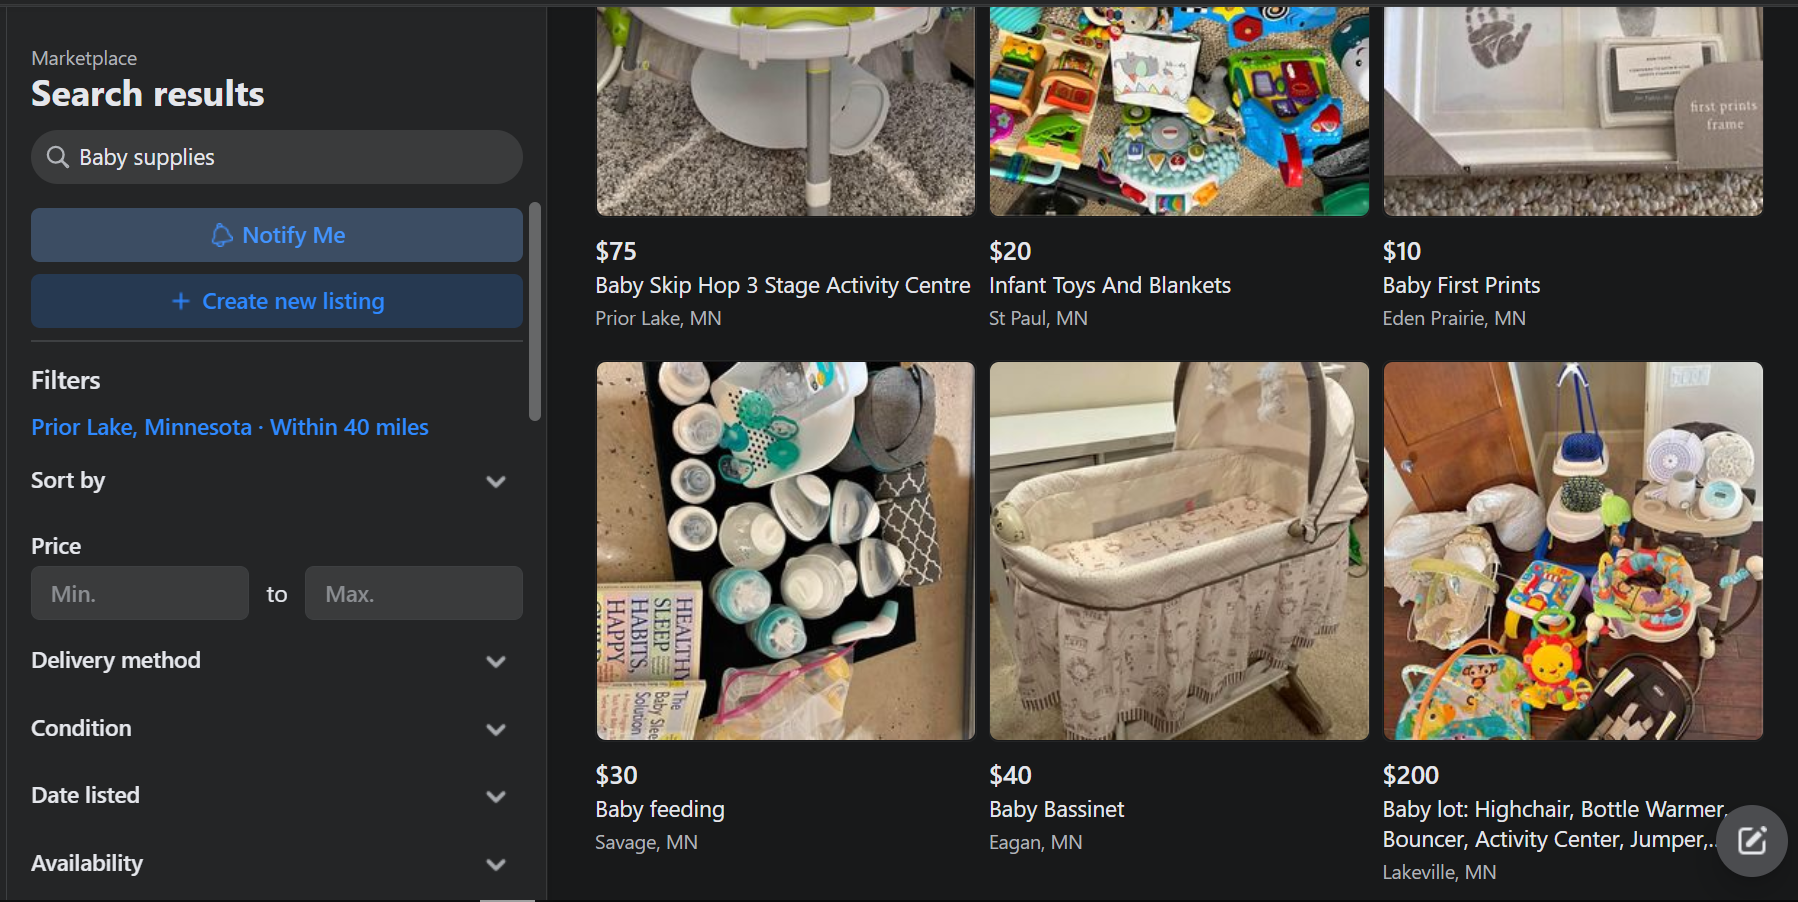 Baby suppliers on Facebook  marketplace